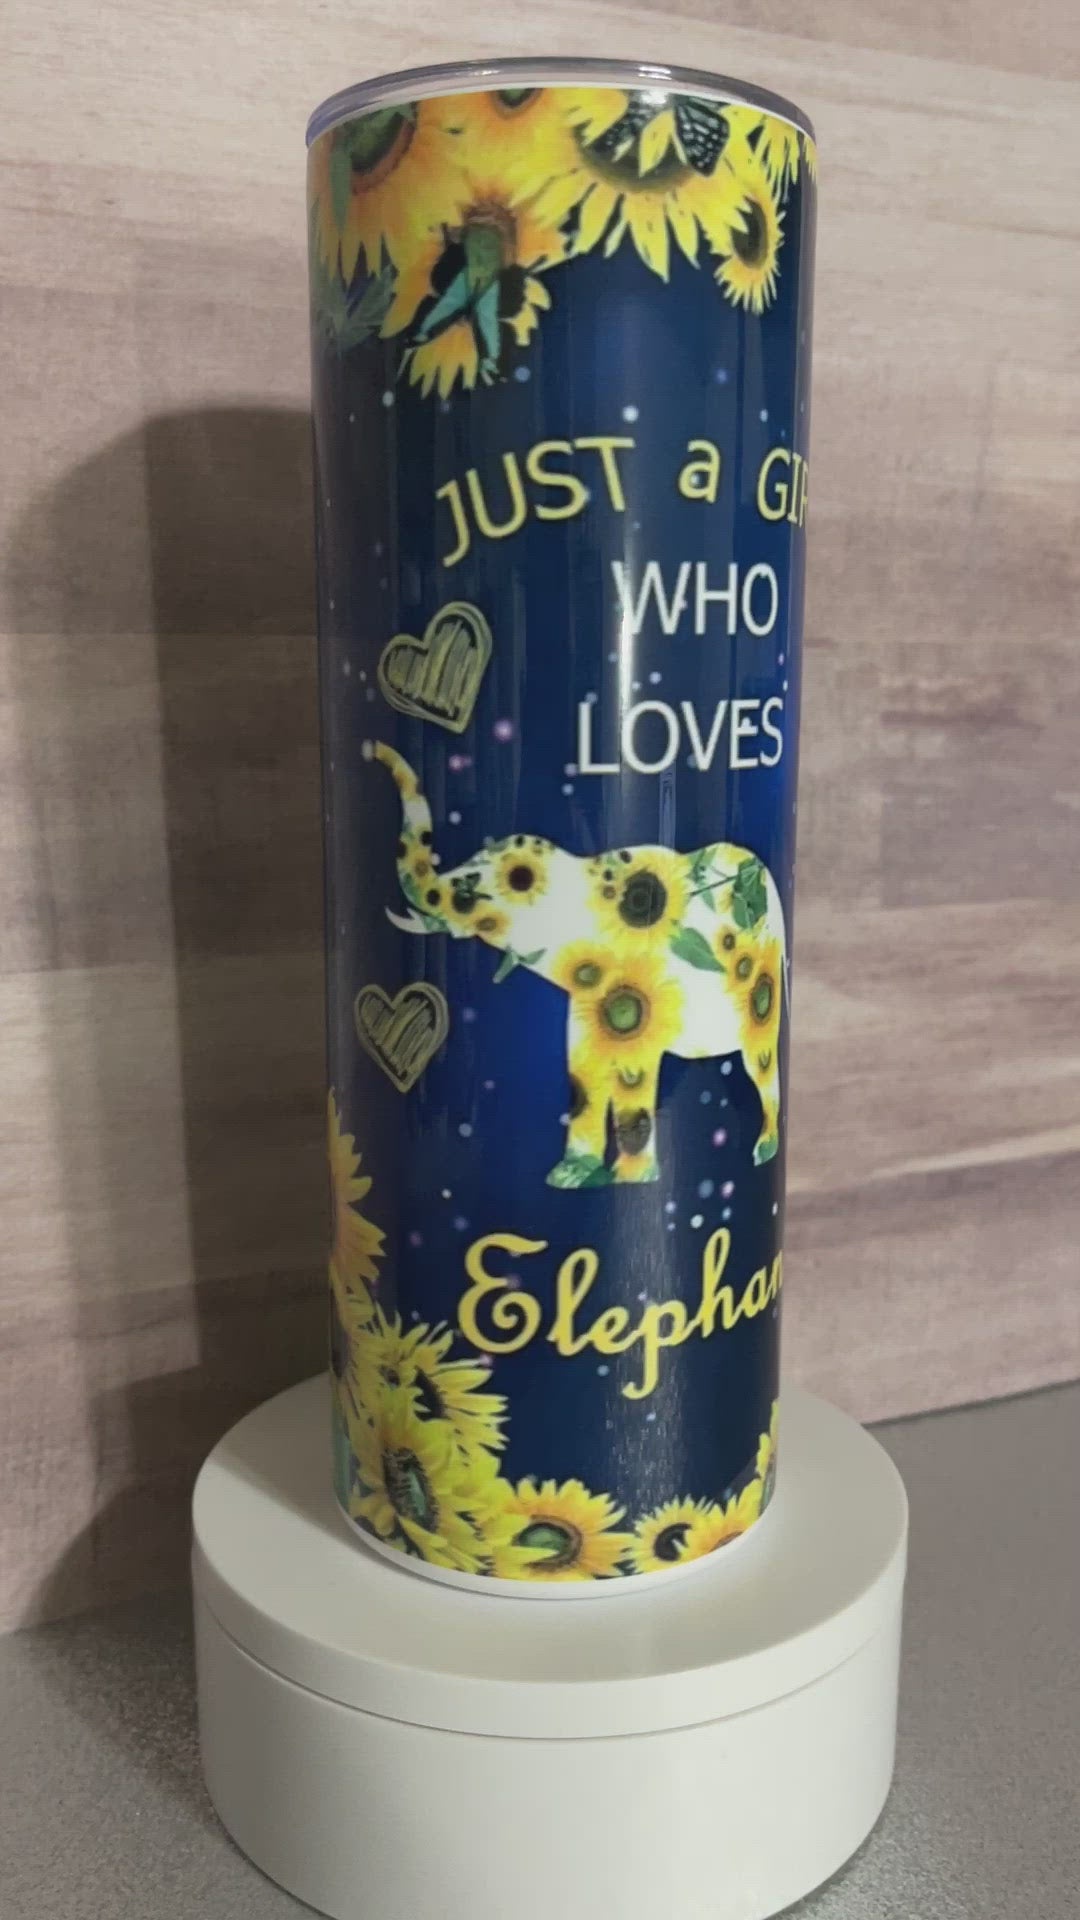 20 oz Tumbler - Just a Girl Who Loves Elephants, makes a great gift